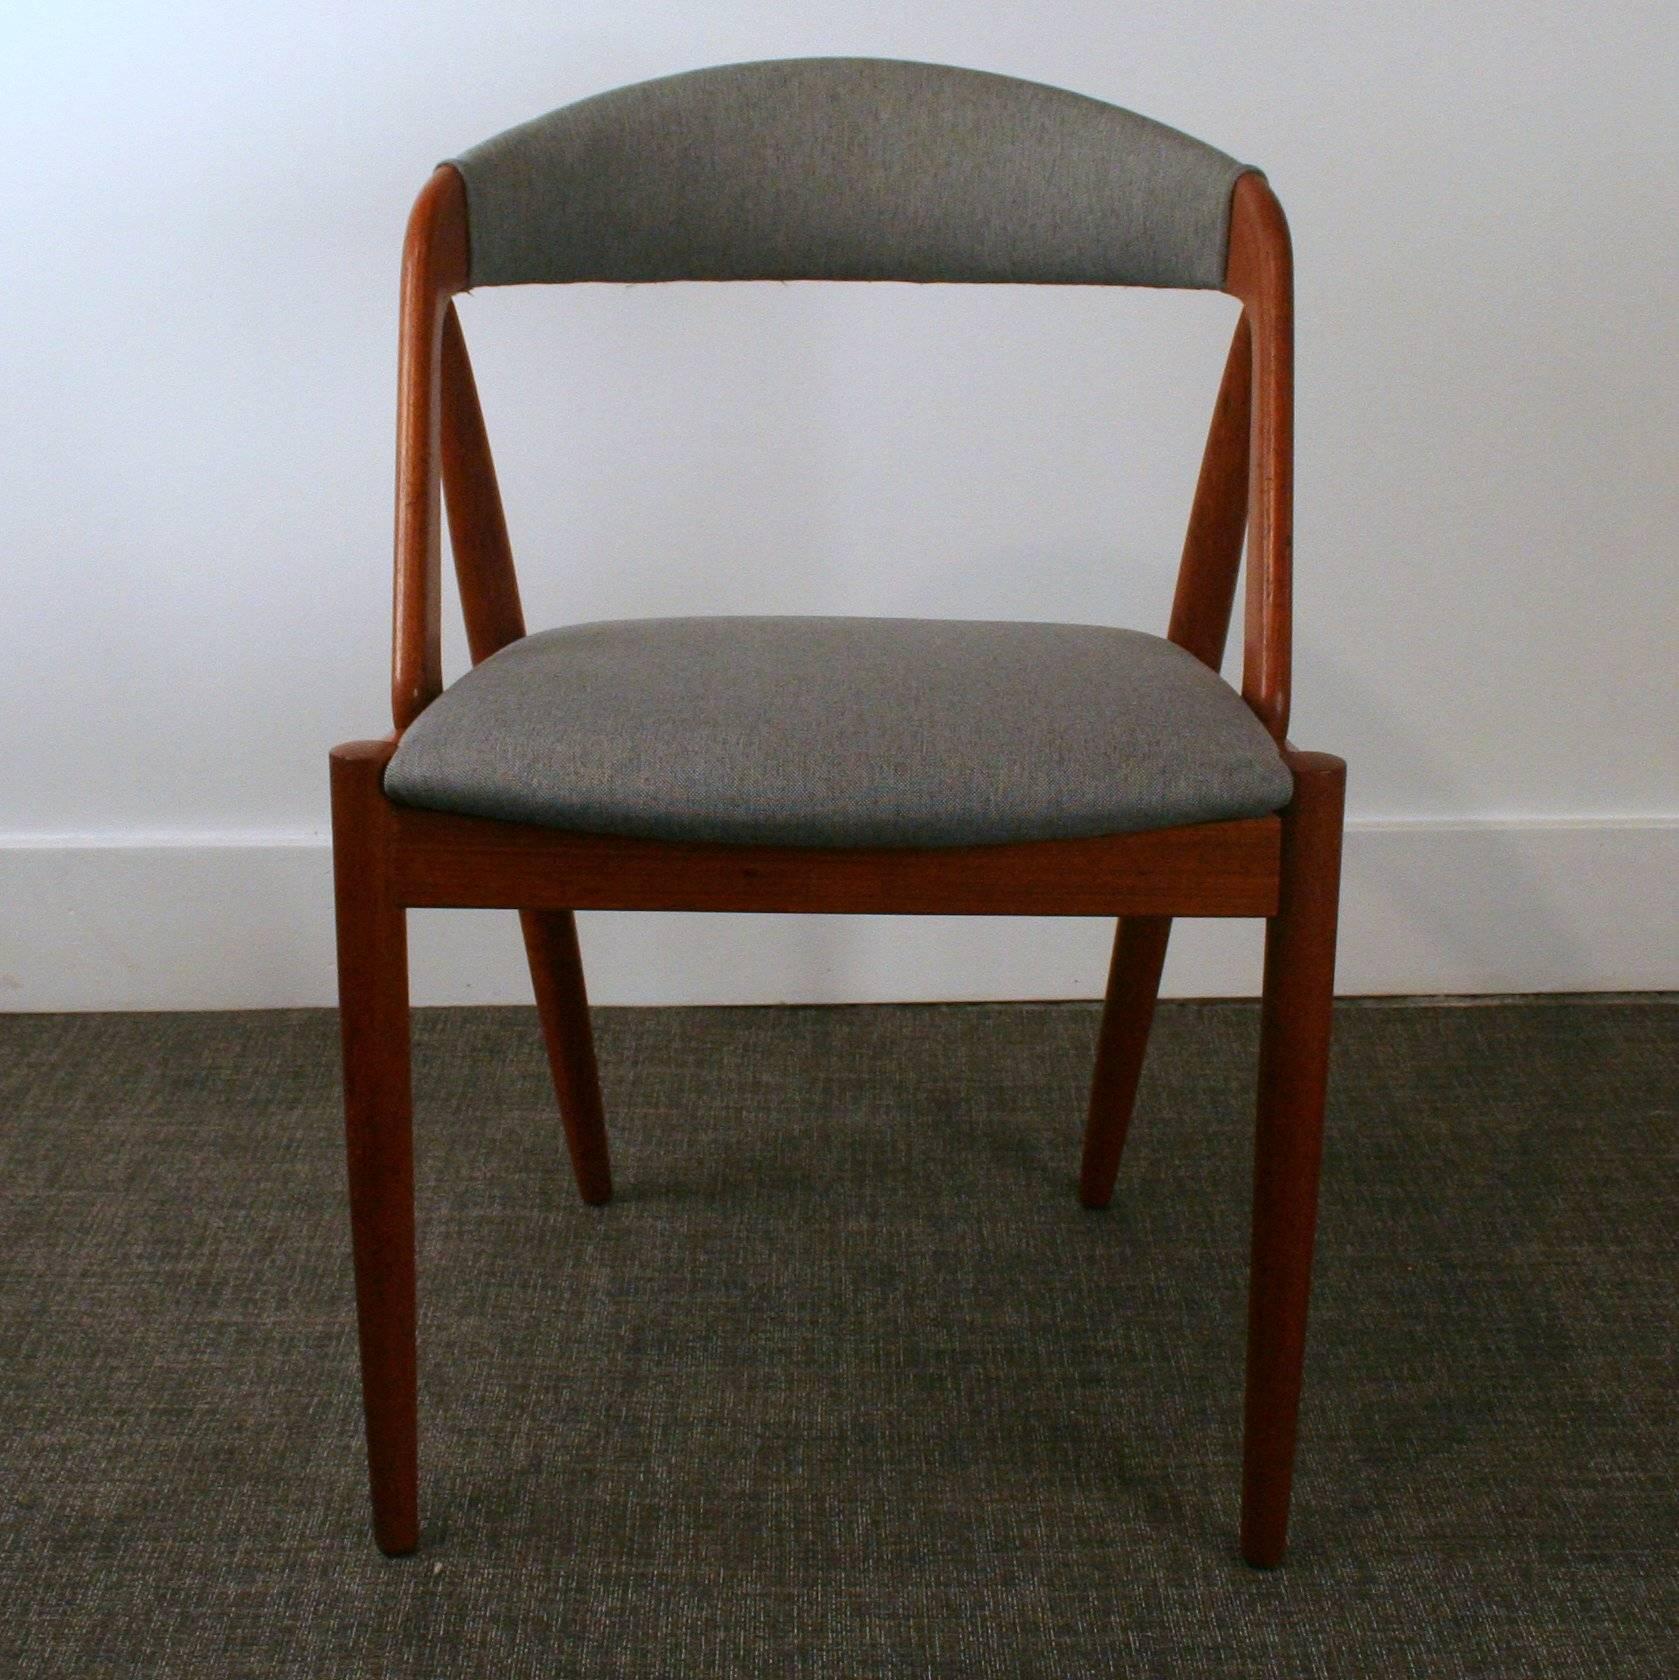 Beautiful vintage Kai Kristiansen Model 31 dining chair, newly reupholstered. Priced individually. Made in Denmark.